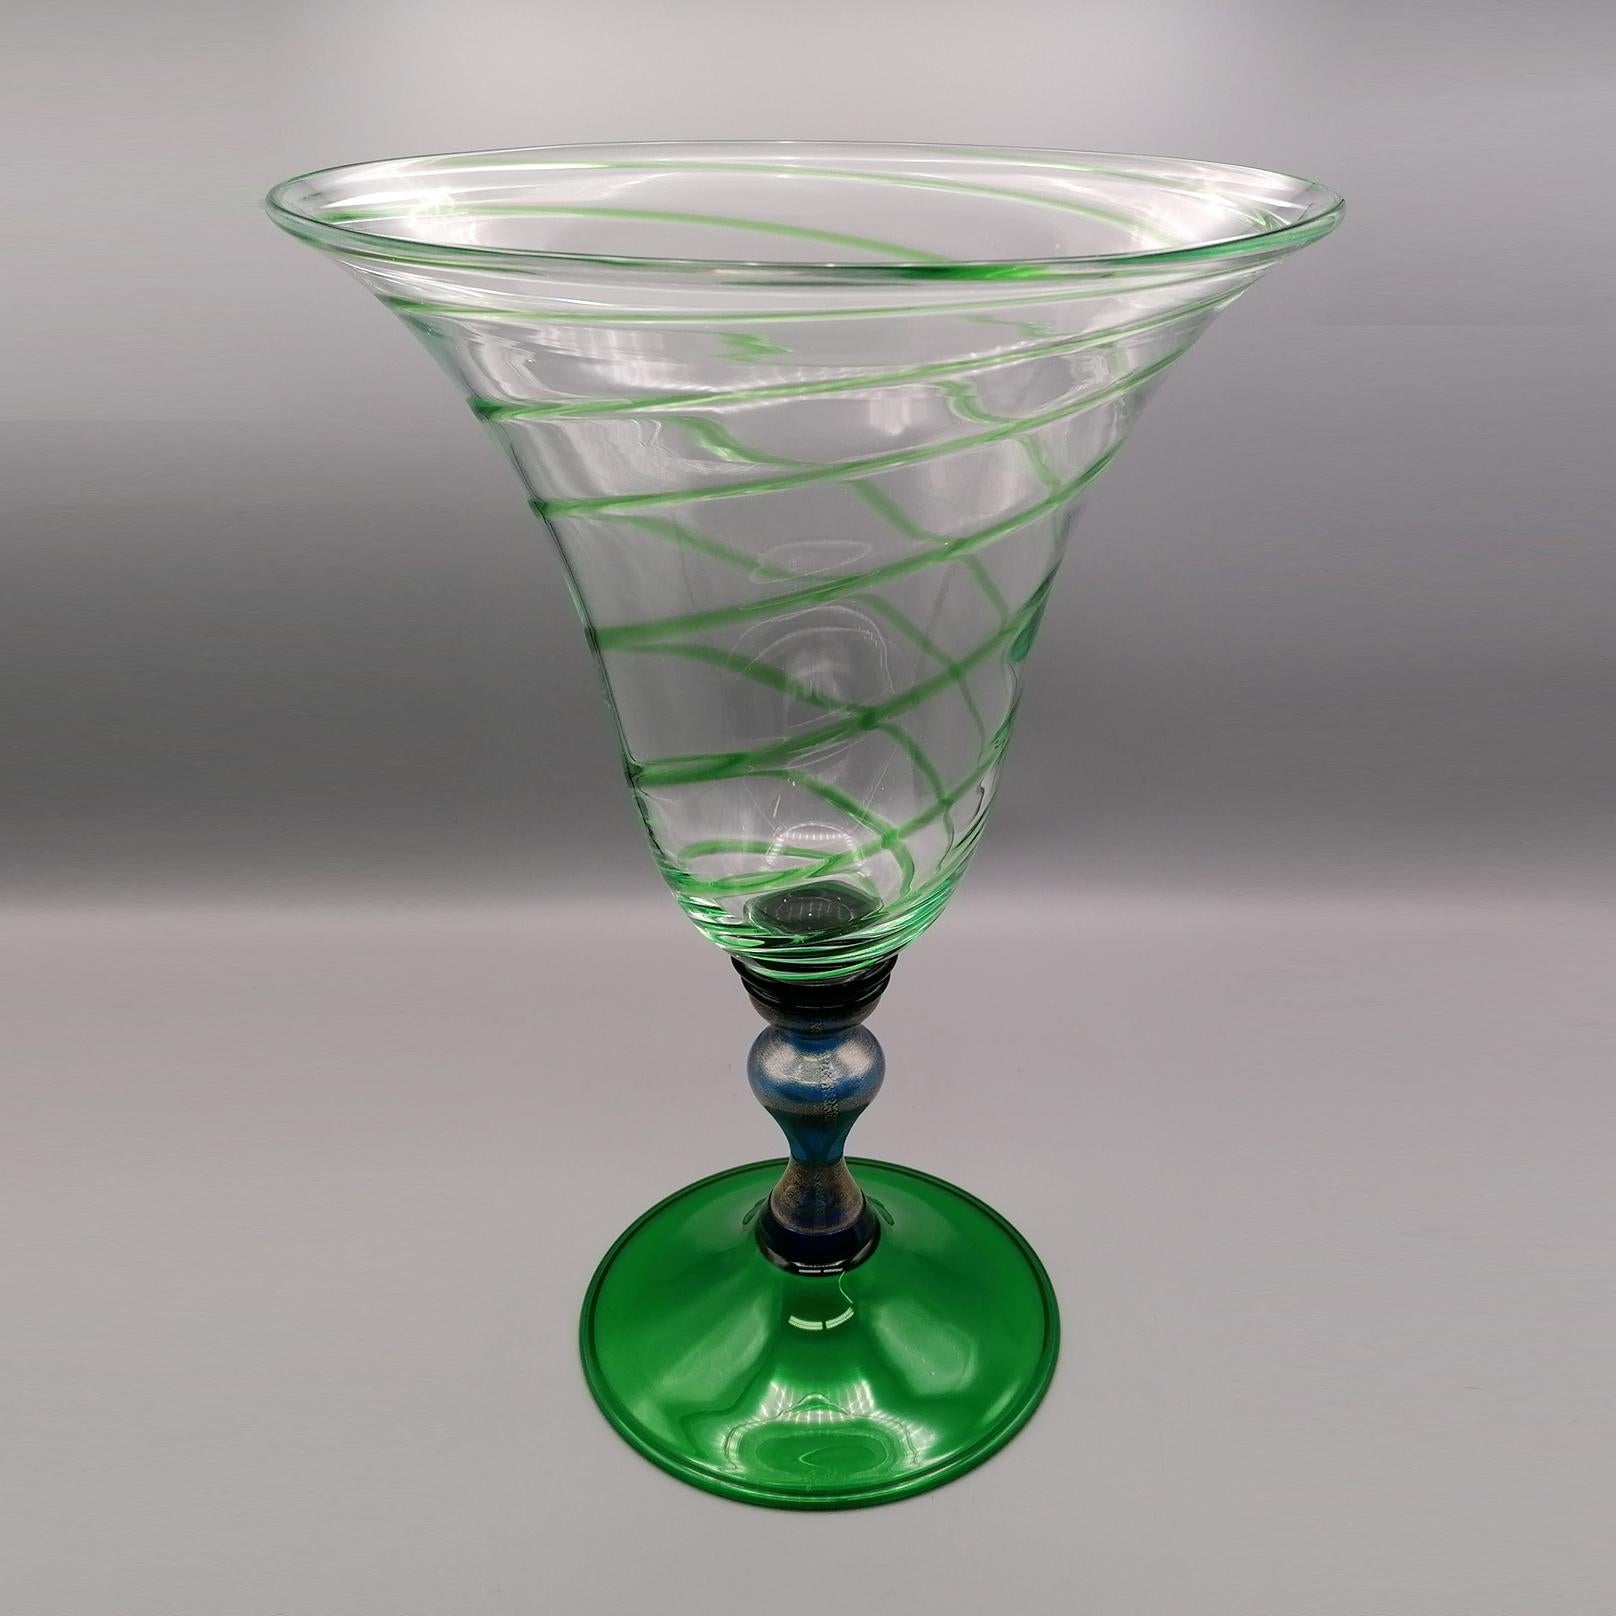 20th century Italian murano glass vase

Glass vase made in Murano - Venice - Italy by the Gabbiani artisan factory.
The base is green, while the stem is blue where flakes of pure gold have been inserted.
The cup is flared and made of clear